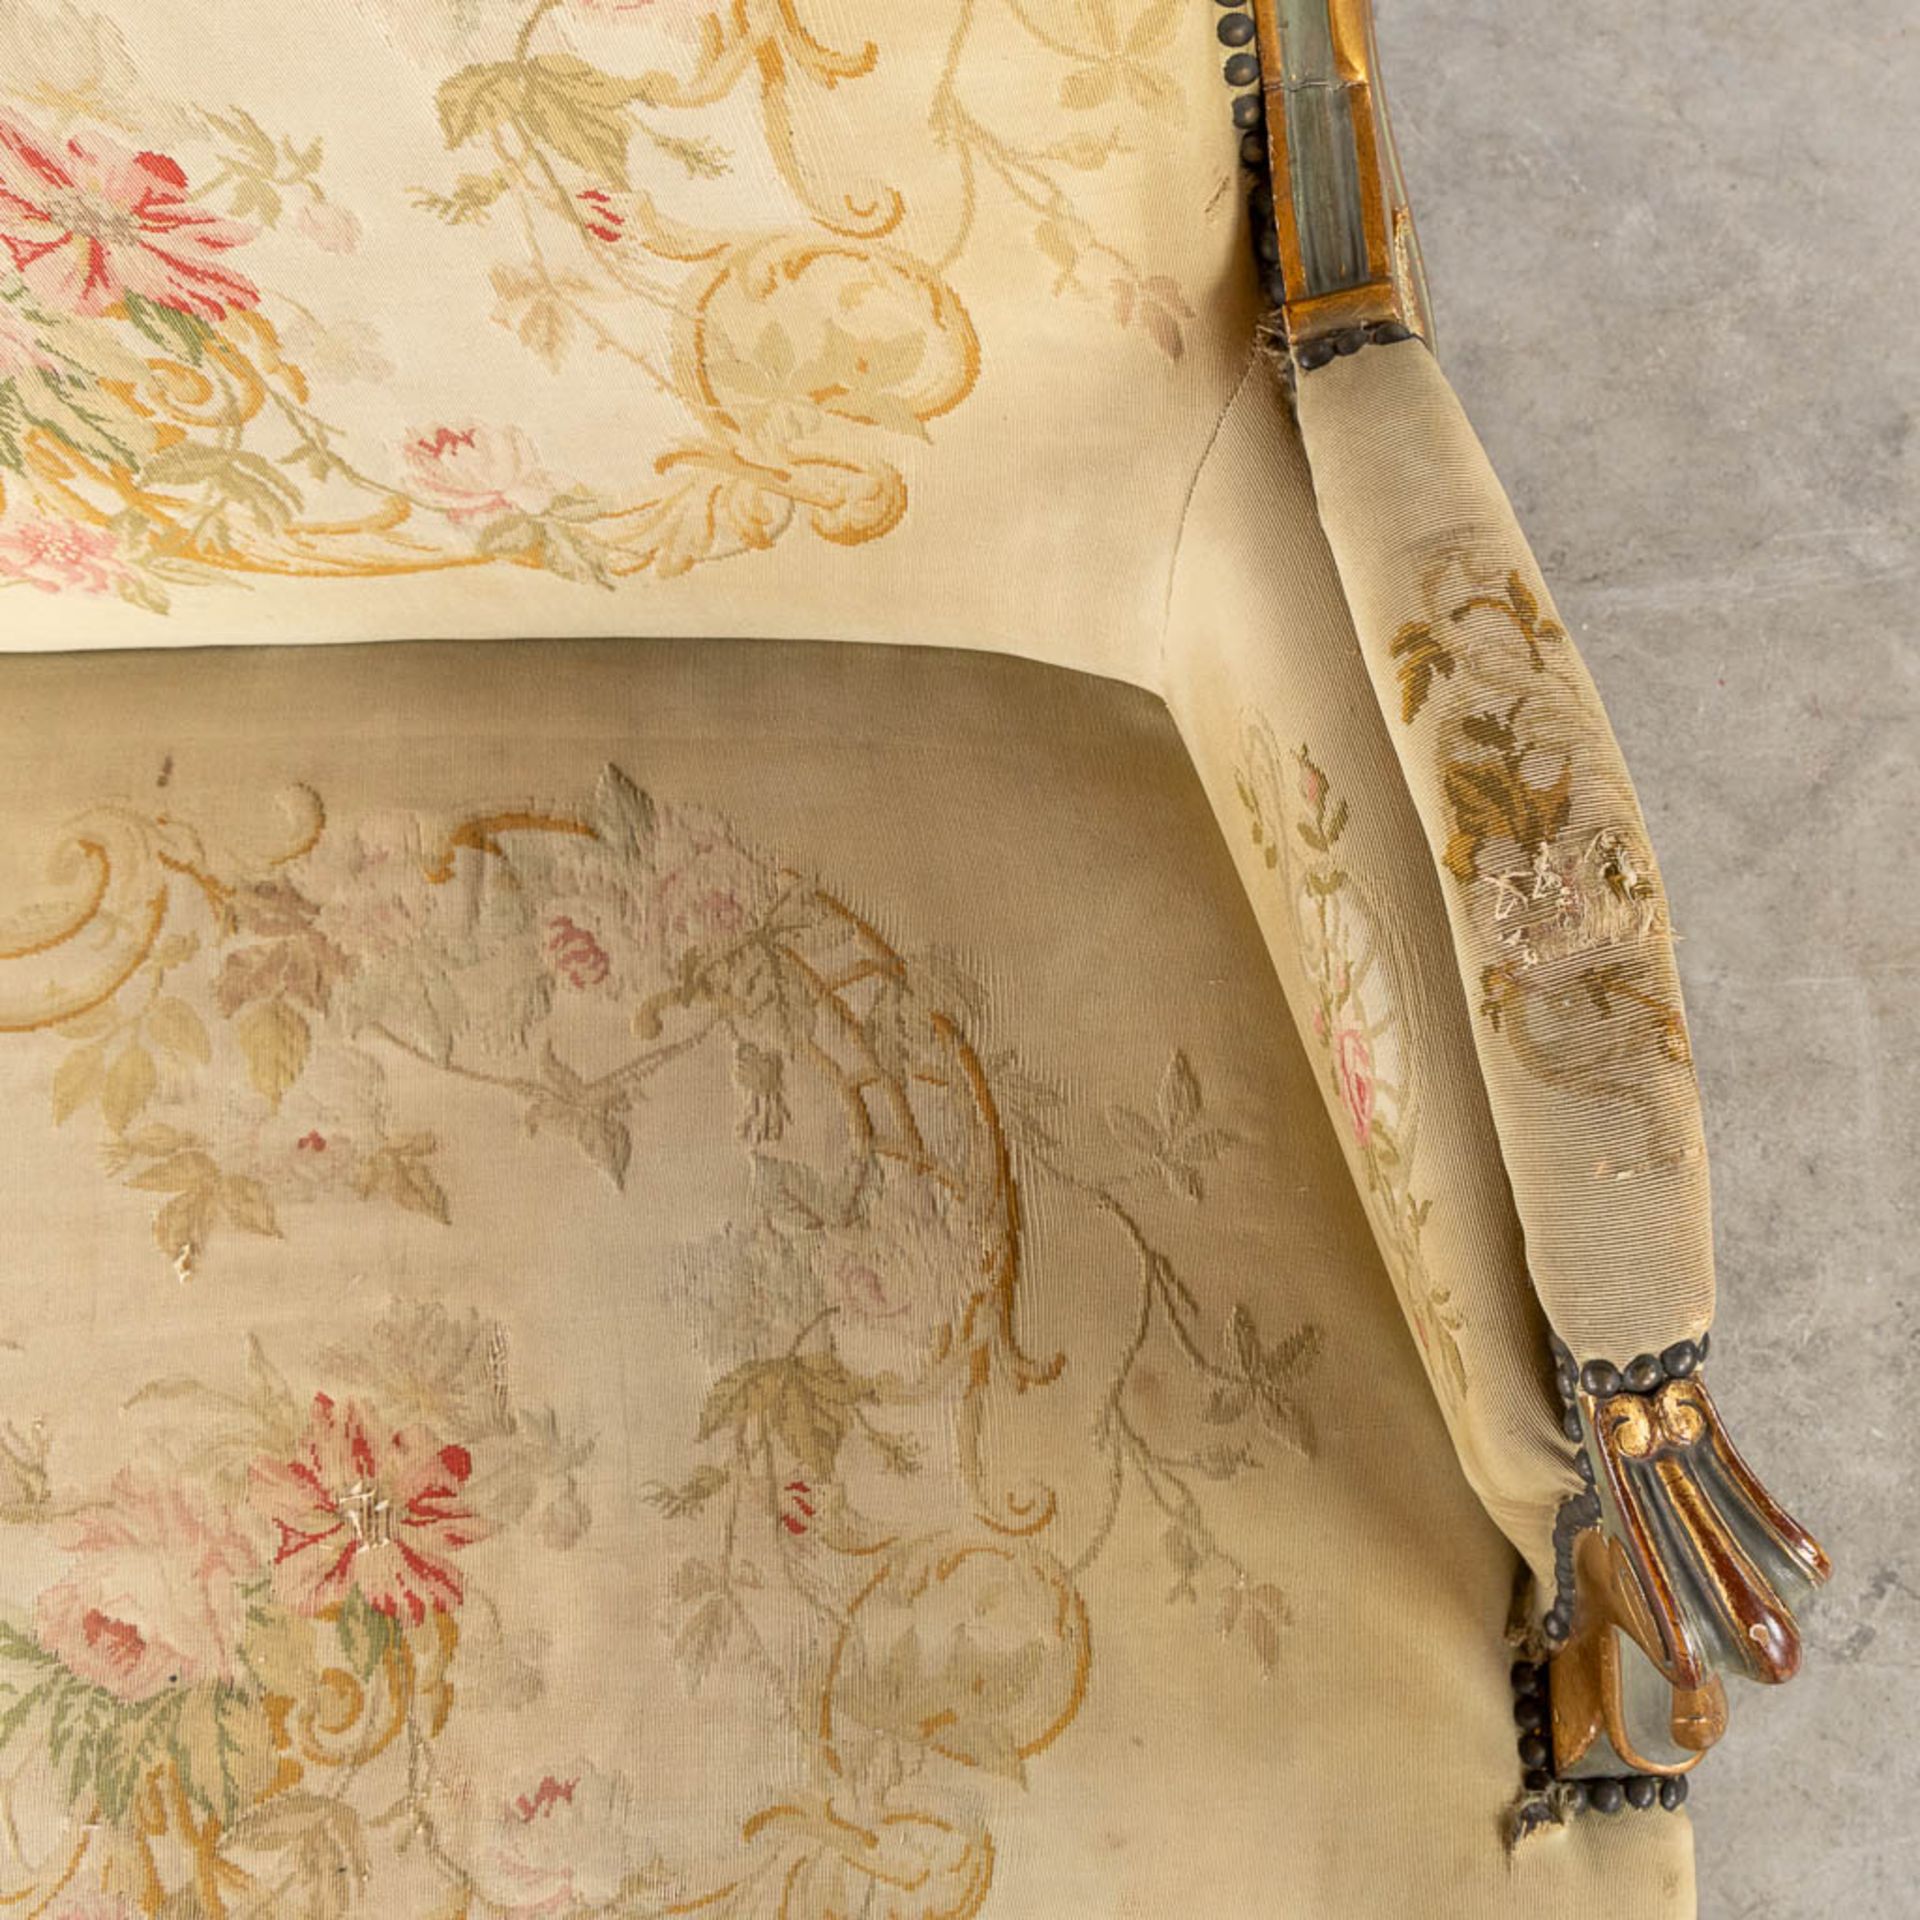 A Louis XV style sofa, upholstered with flower embroideries. (L:80 x W:175 x H:96 cm) - Image 9 of 11